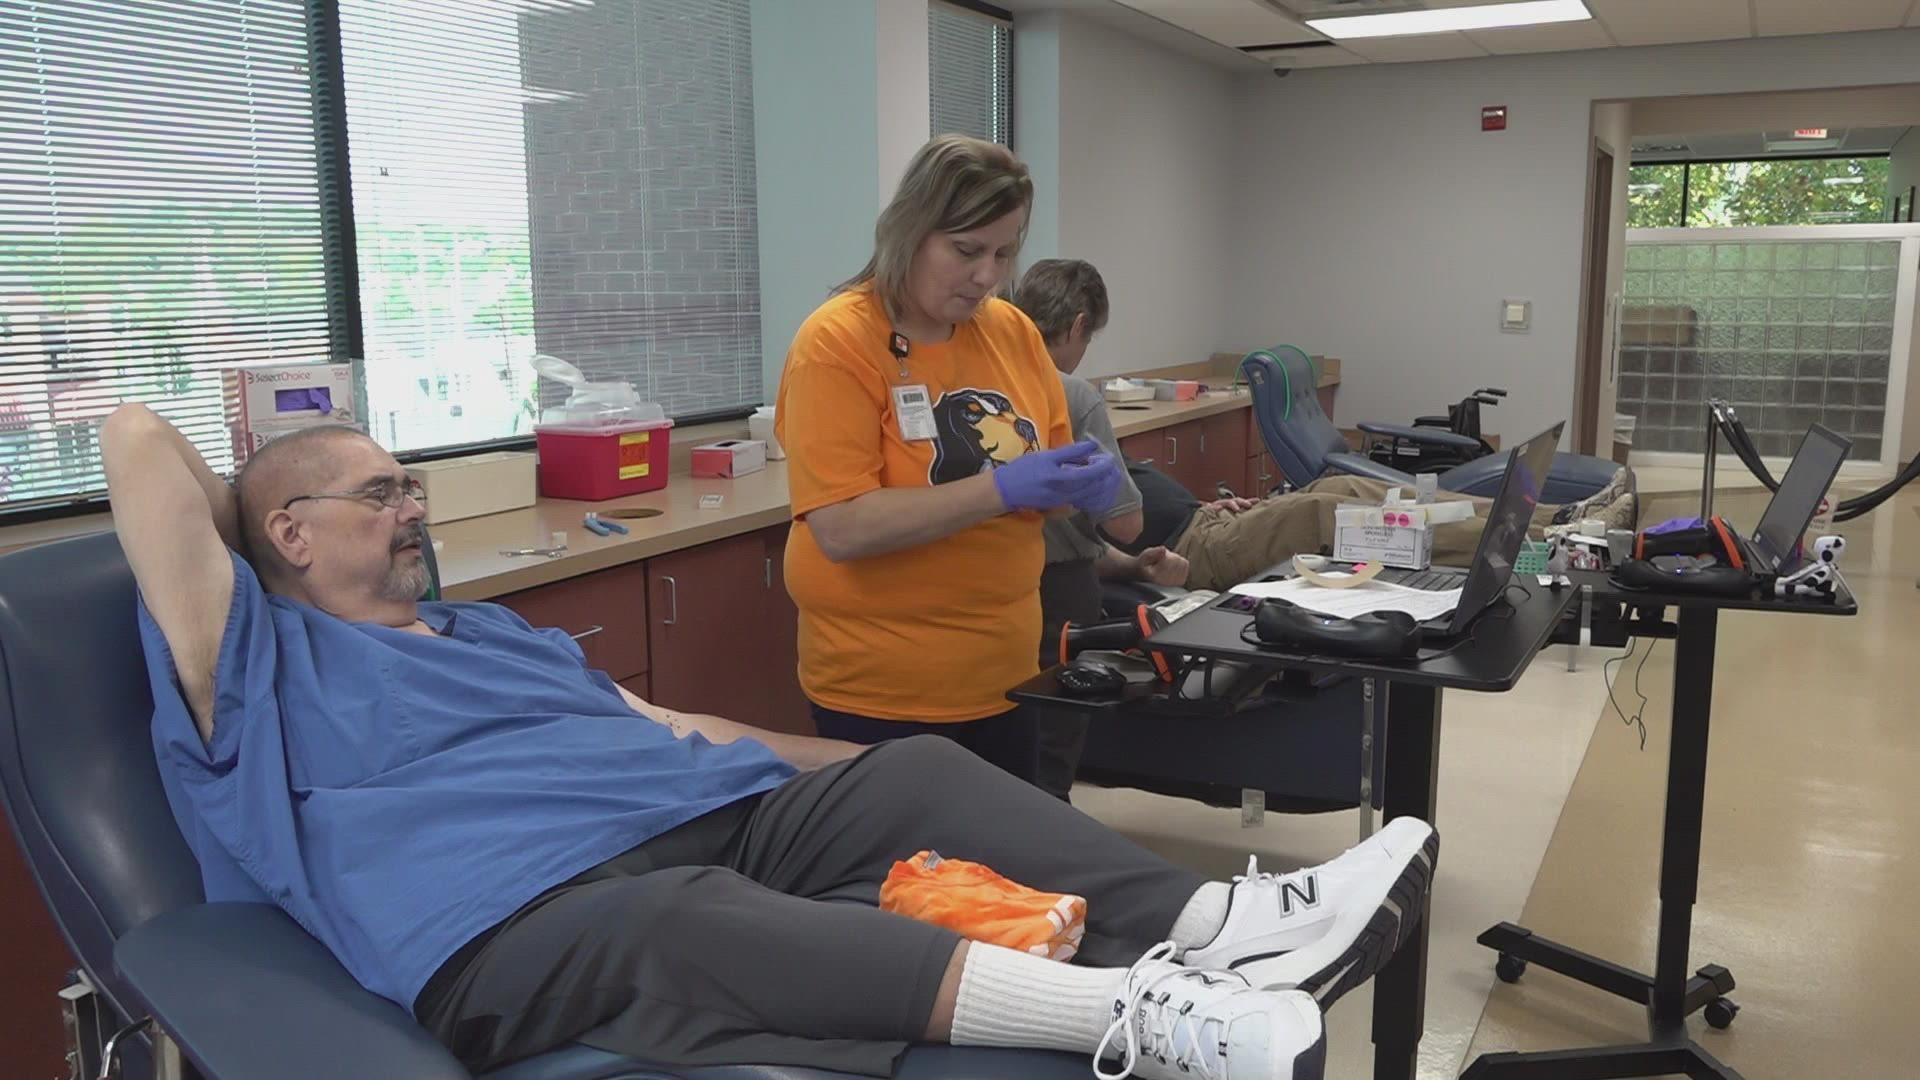 The MEDIC Regional Blood Center is hosting its annual blood drive against a Florida blood bank, ahead of the Vols game against the Gators.